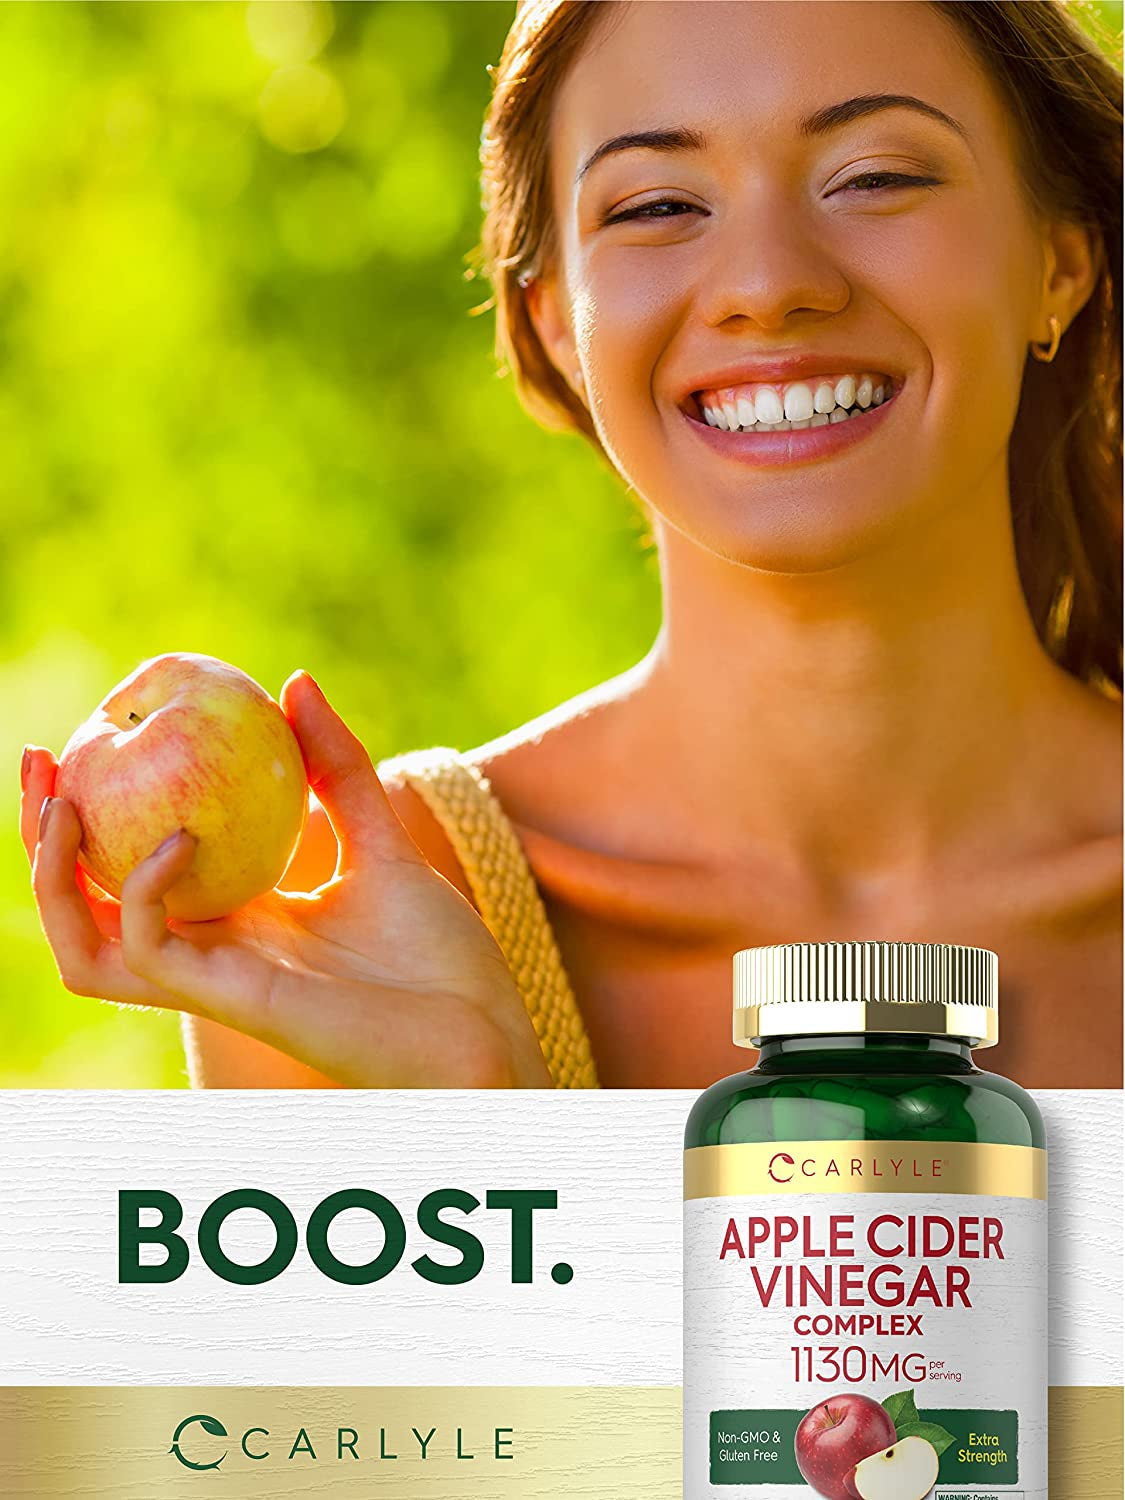 Carlyle Apple Cider Vinegar Complex Capsules | 200 Pills | with Cayenne and Ginger | Non-Gmo & Gluten Free Supplement